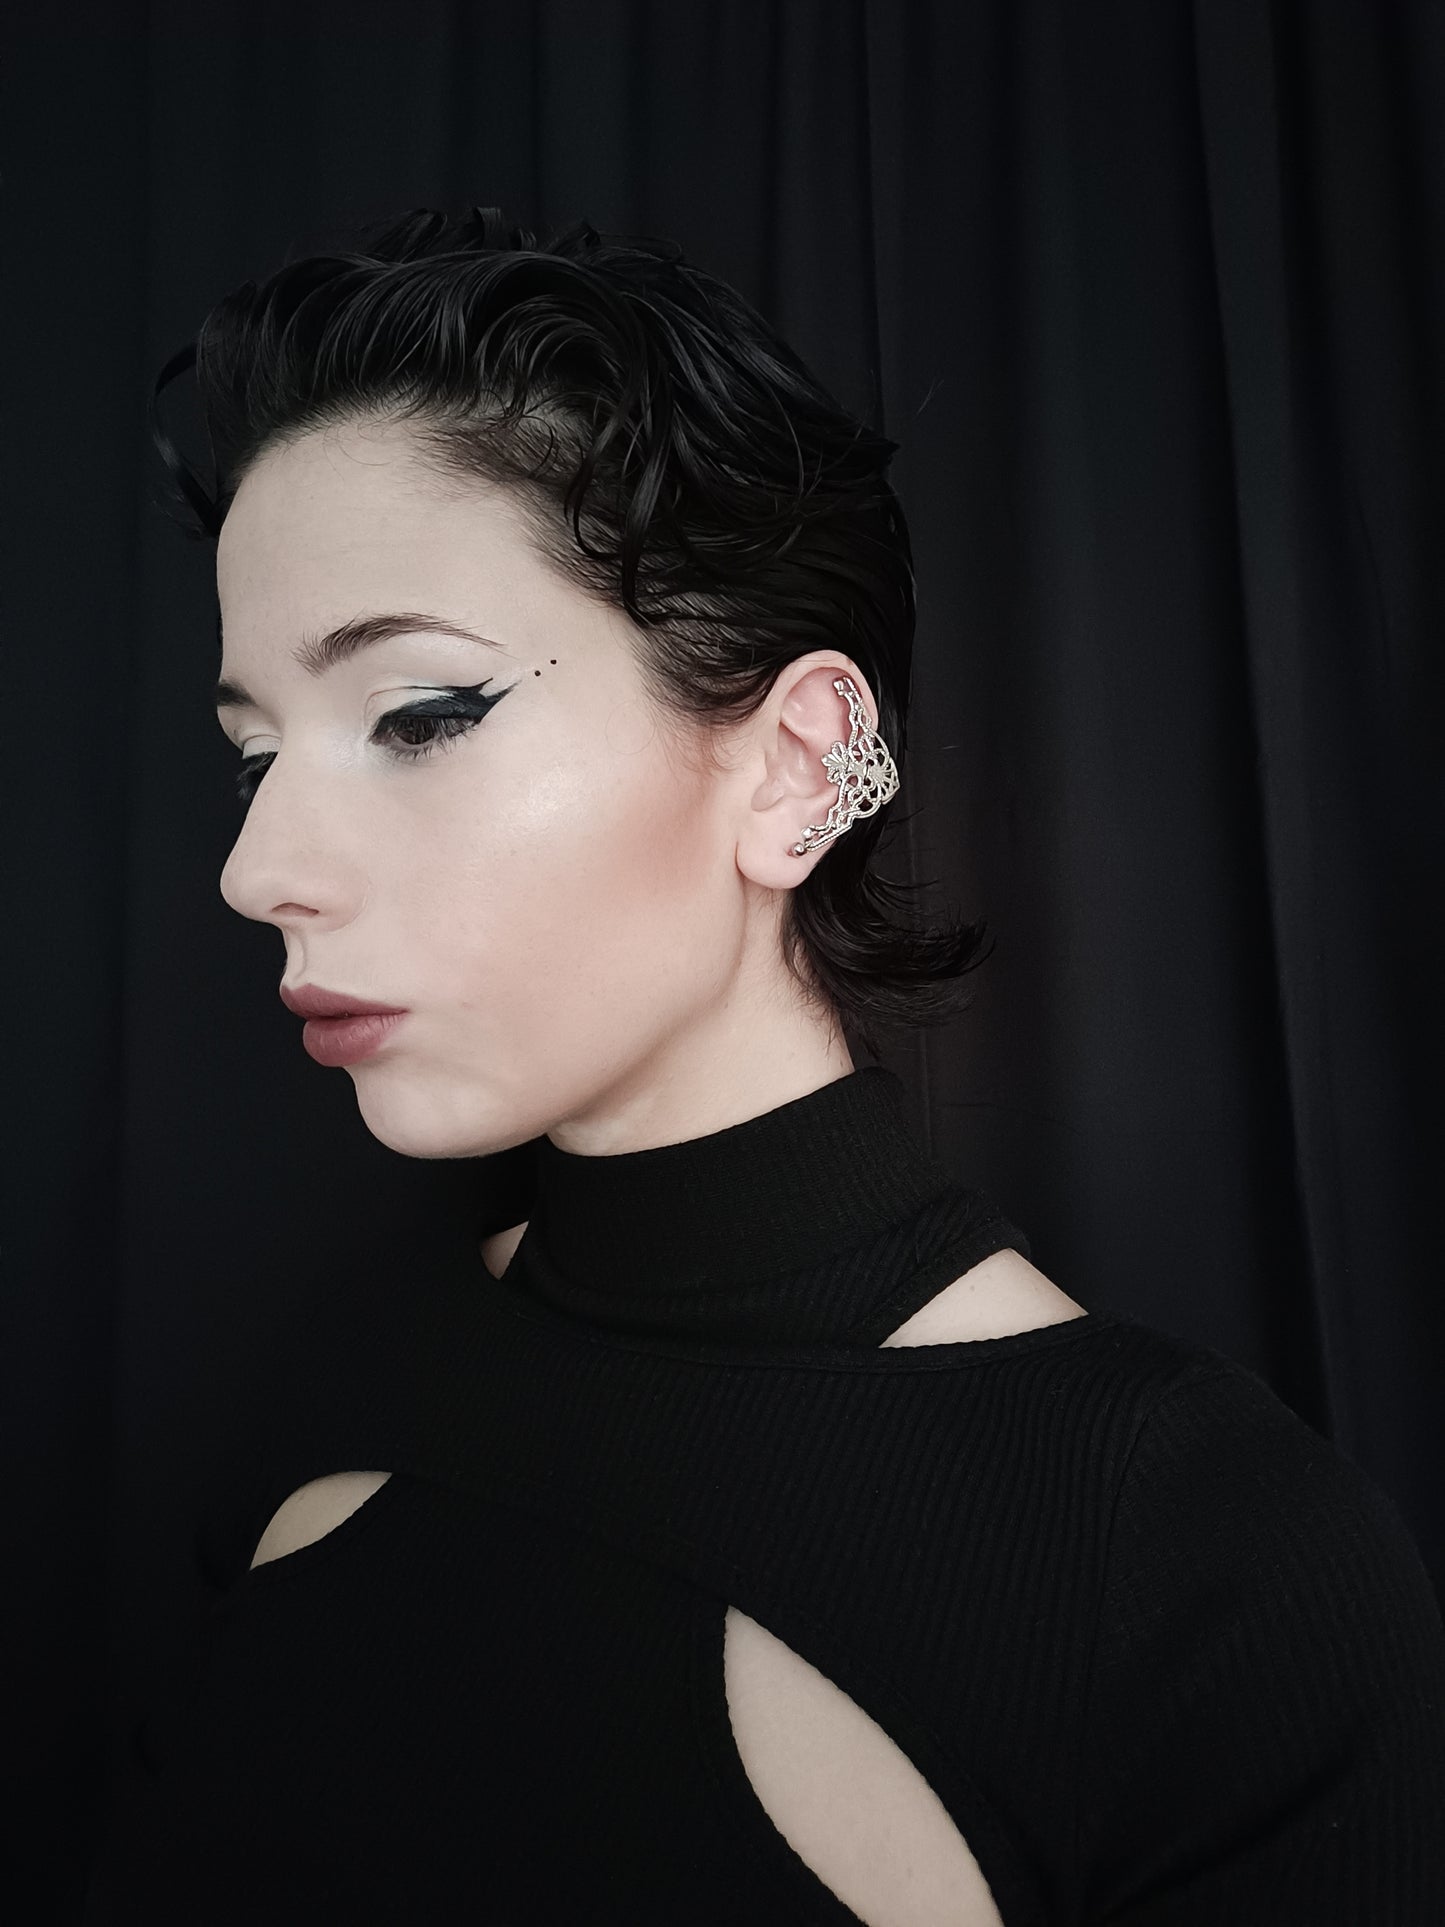 A profile view of a model wearing Myril Jewels cuff earrings, showcasing a neo-goth design with intricate filigree details. The earrings, resembling elegant gothic arches, complement the model's dark avant-garde style. This gothic-chic accessory is perfect for those embracing a whimsigoth or witchcore aesthetic, versatile enough for everyday wear, and striking for a Halloween or festival ensemble. The model's sleek hairstyle and bold eyeliner accentuate the earrings